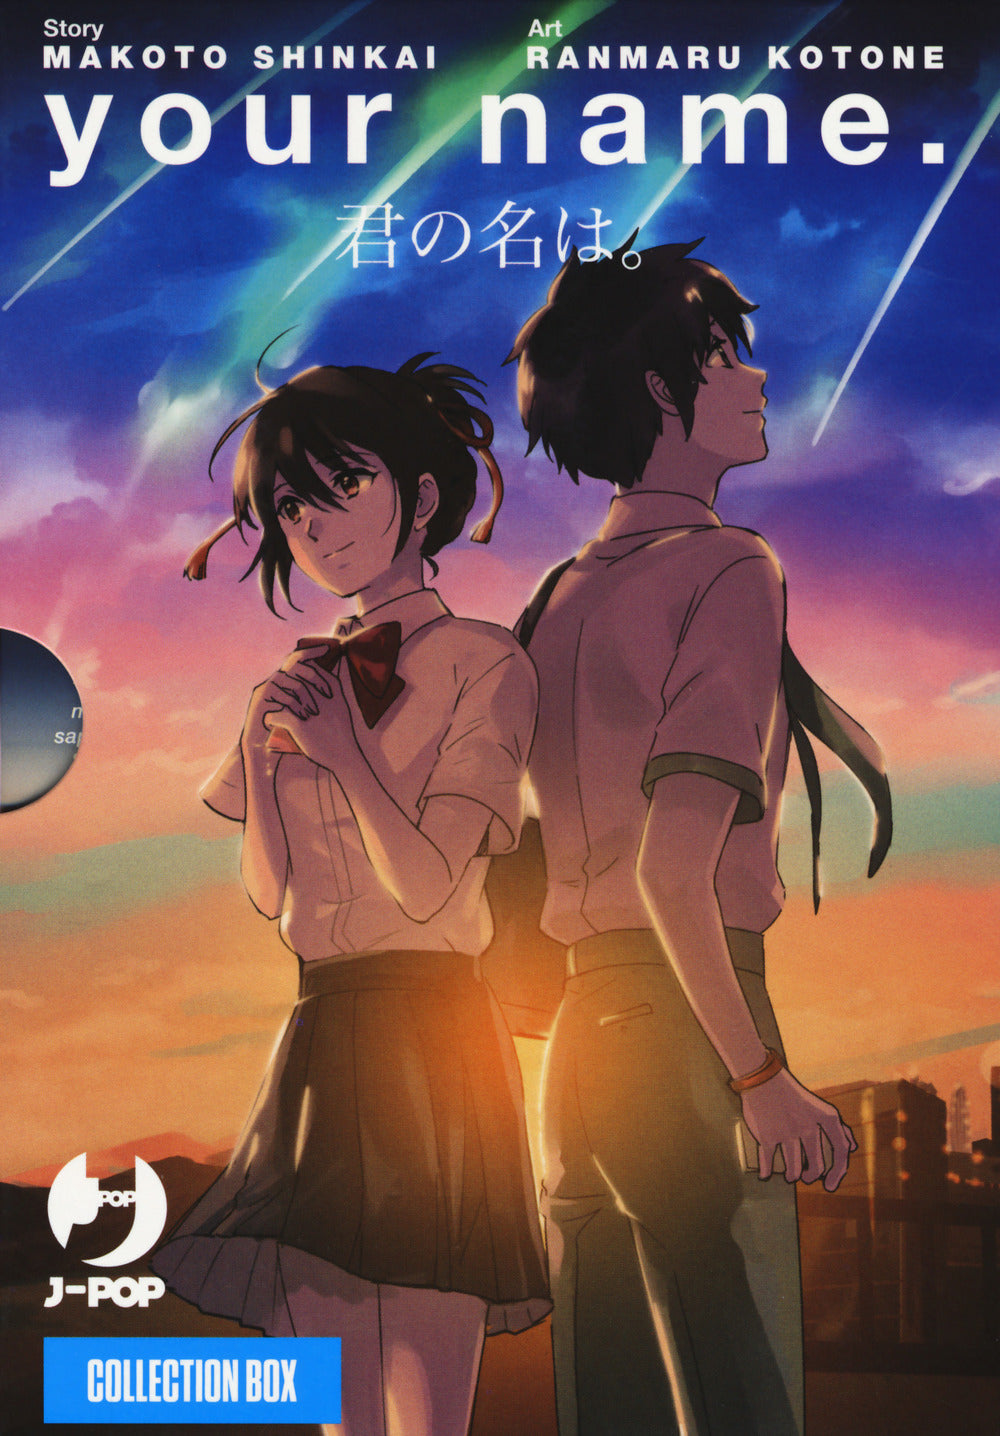 Your name. Collection box. Vol. 1-3.